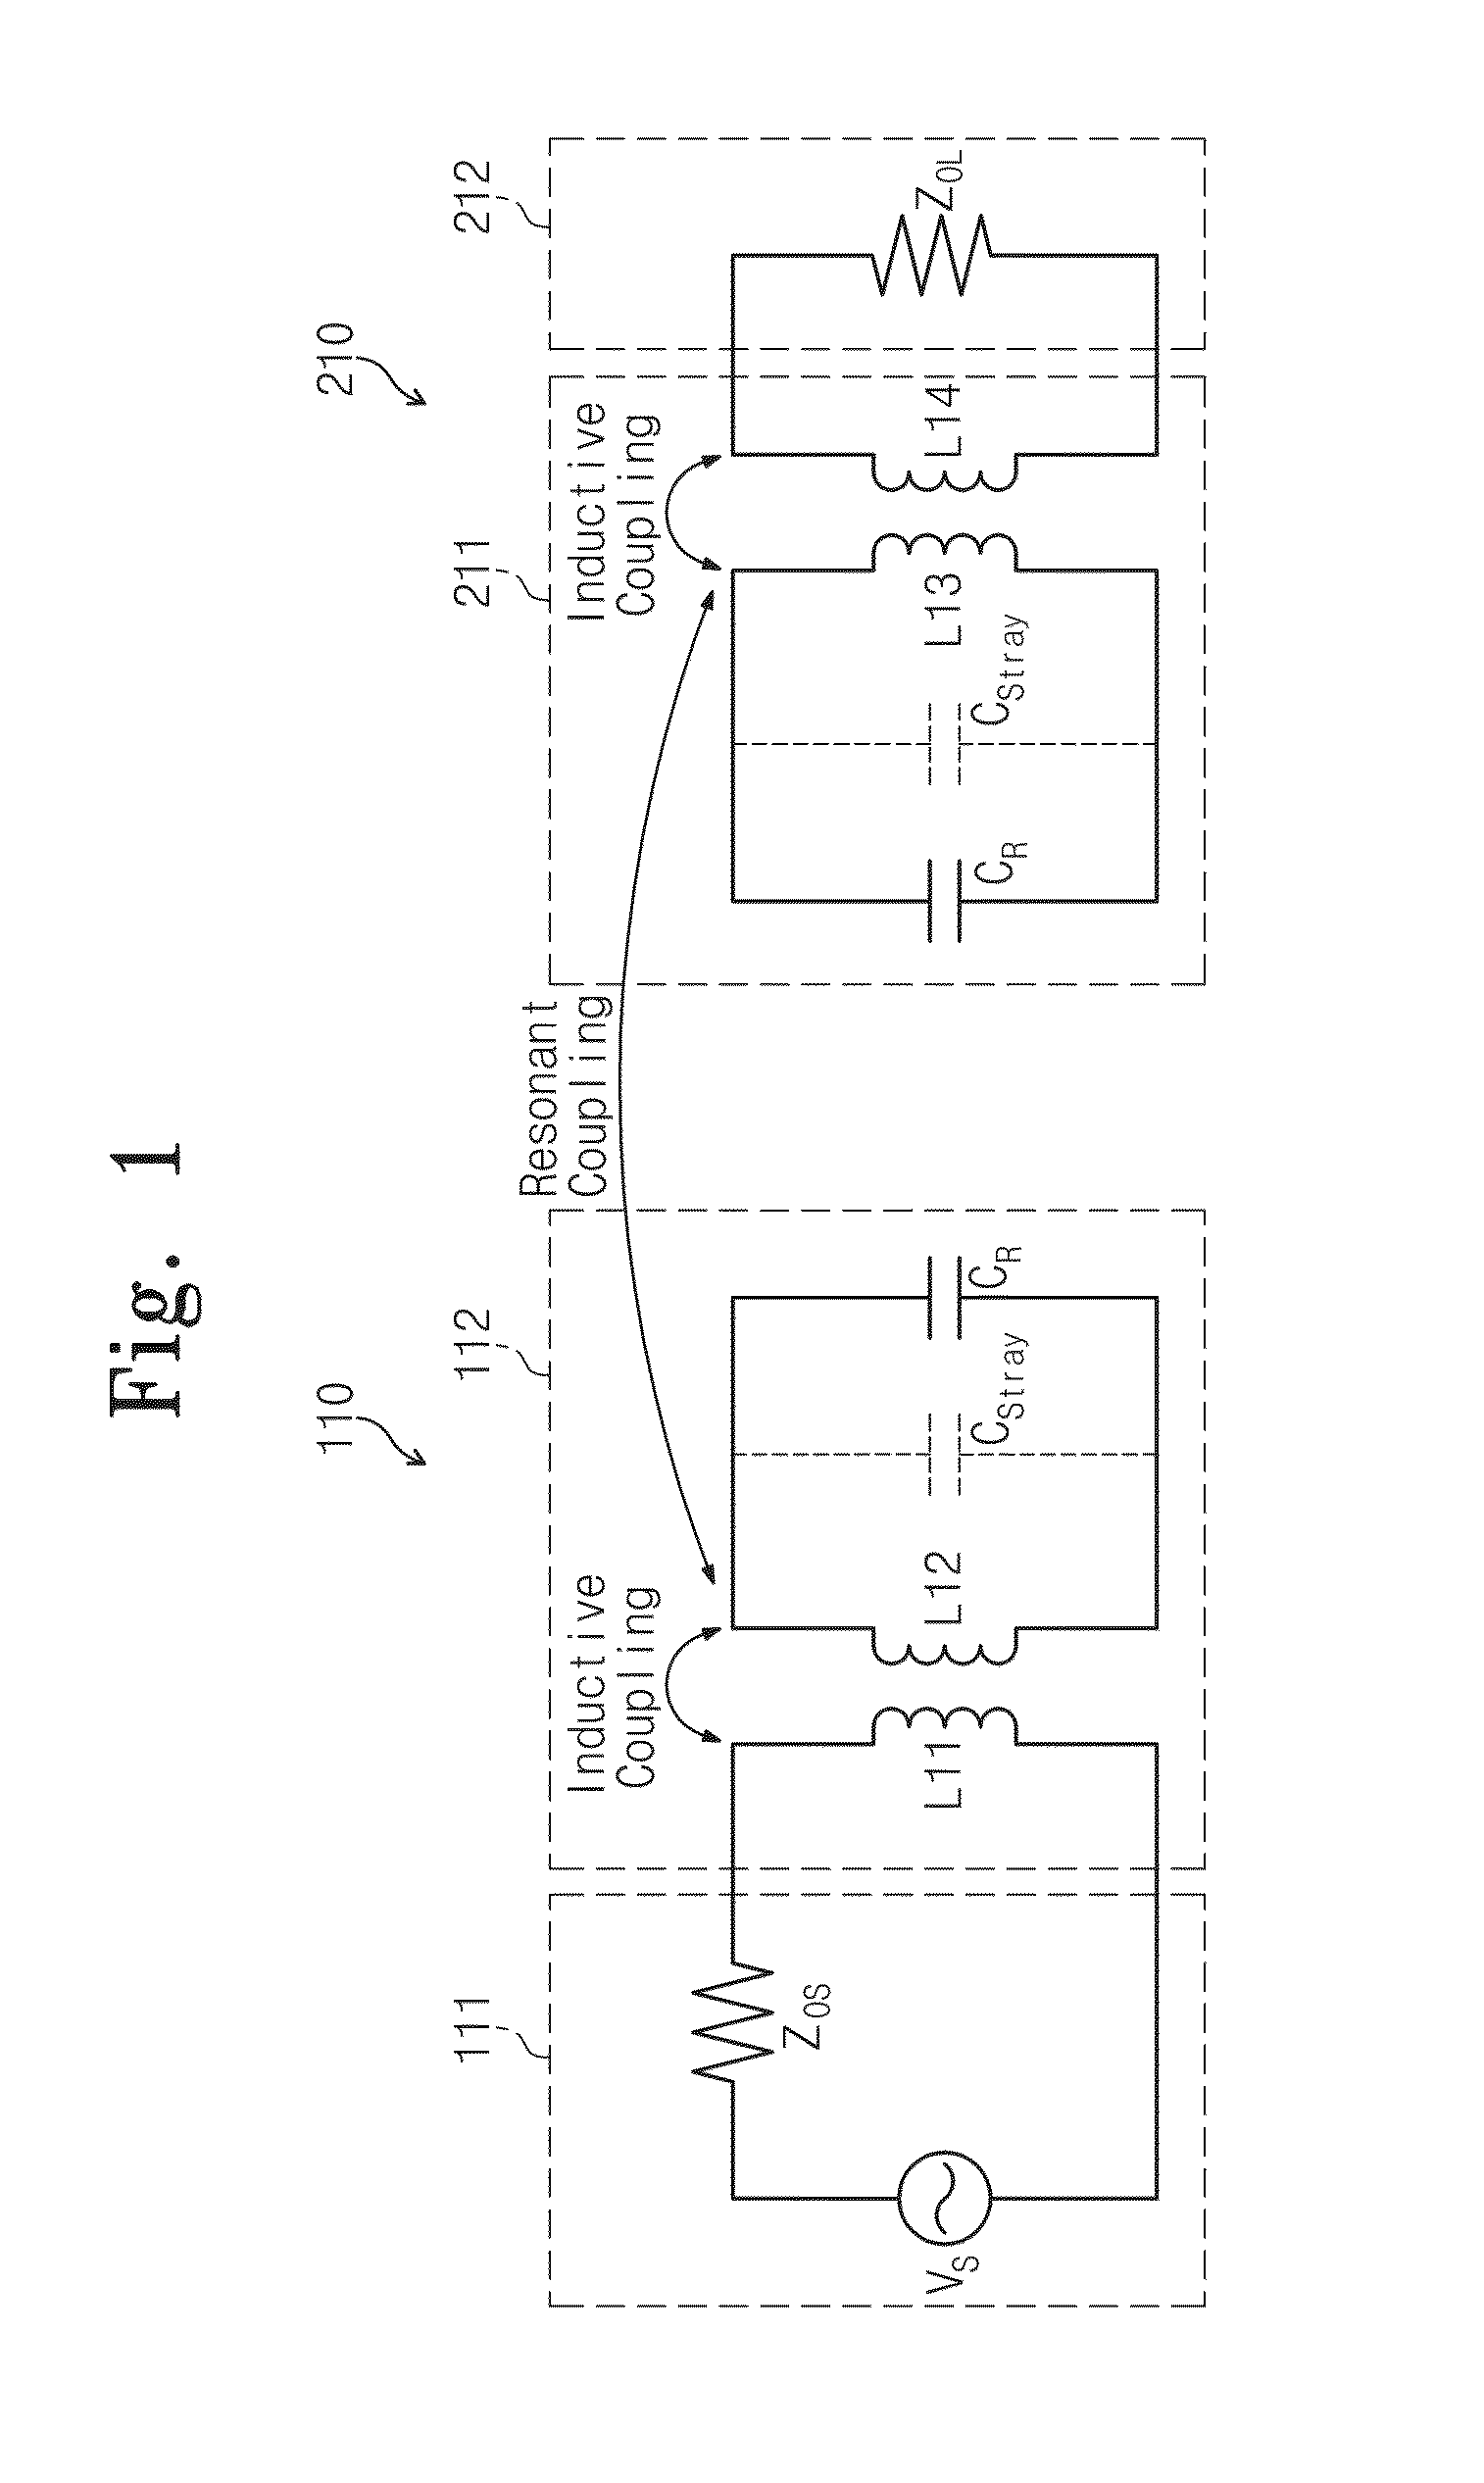 Resonance coupling wireless power transfer receiver and transmitter